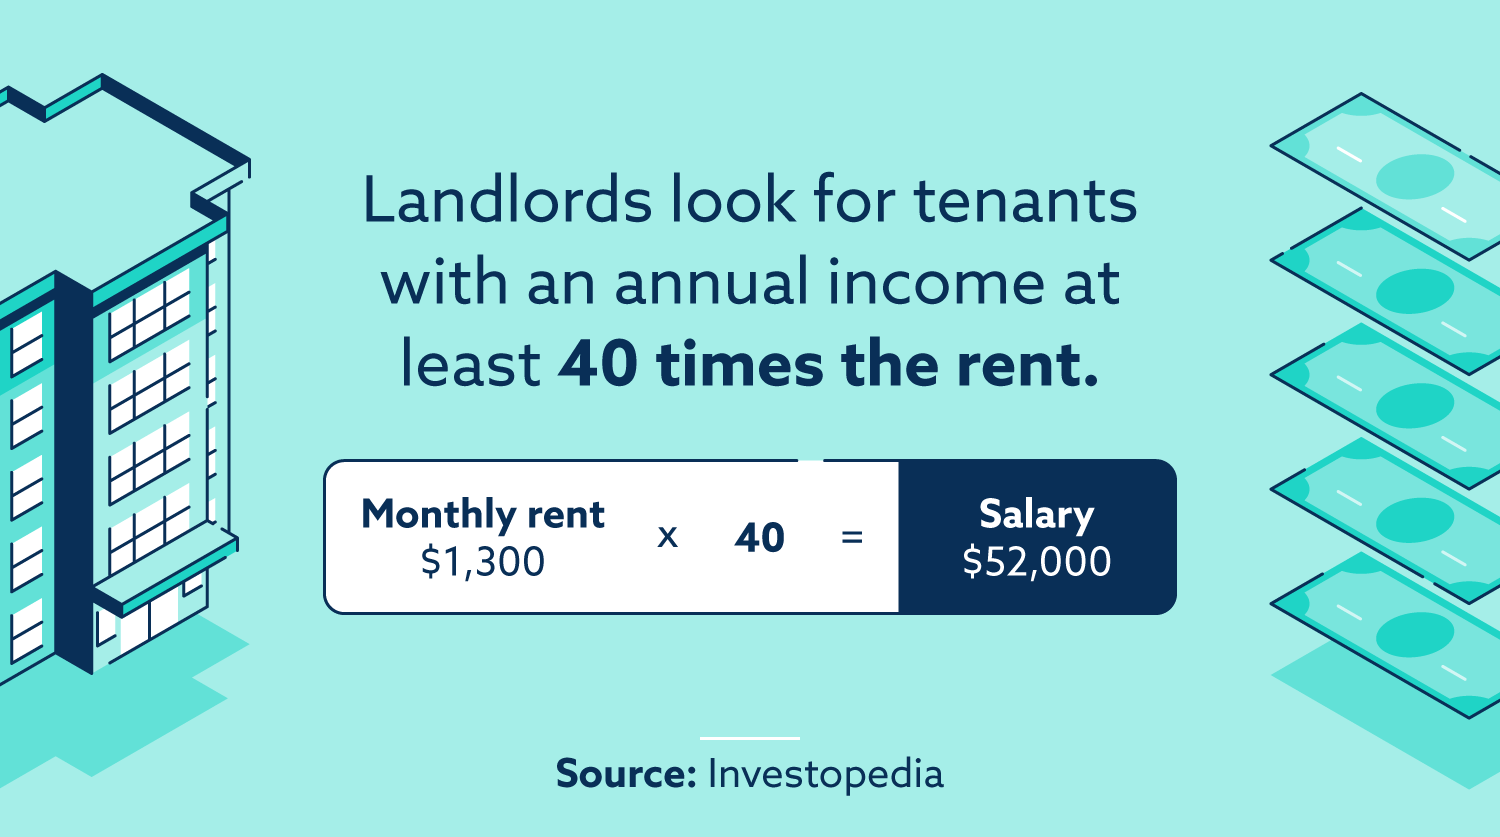 Landlords look for tenants with an annual income at least 40 times the rent. Source: Investopedia.